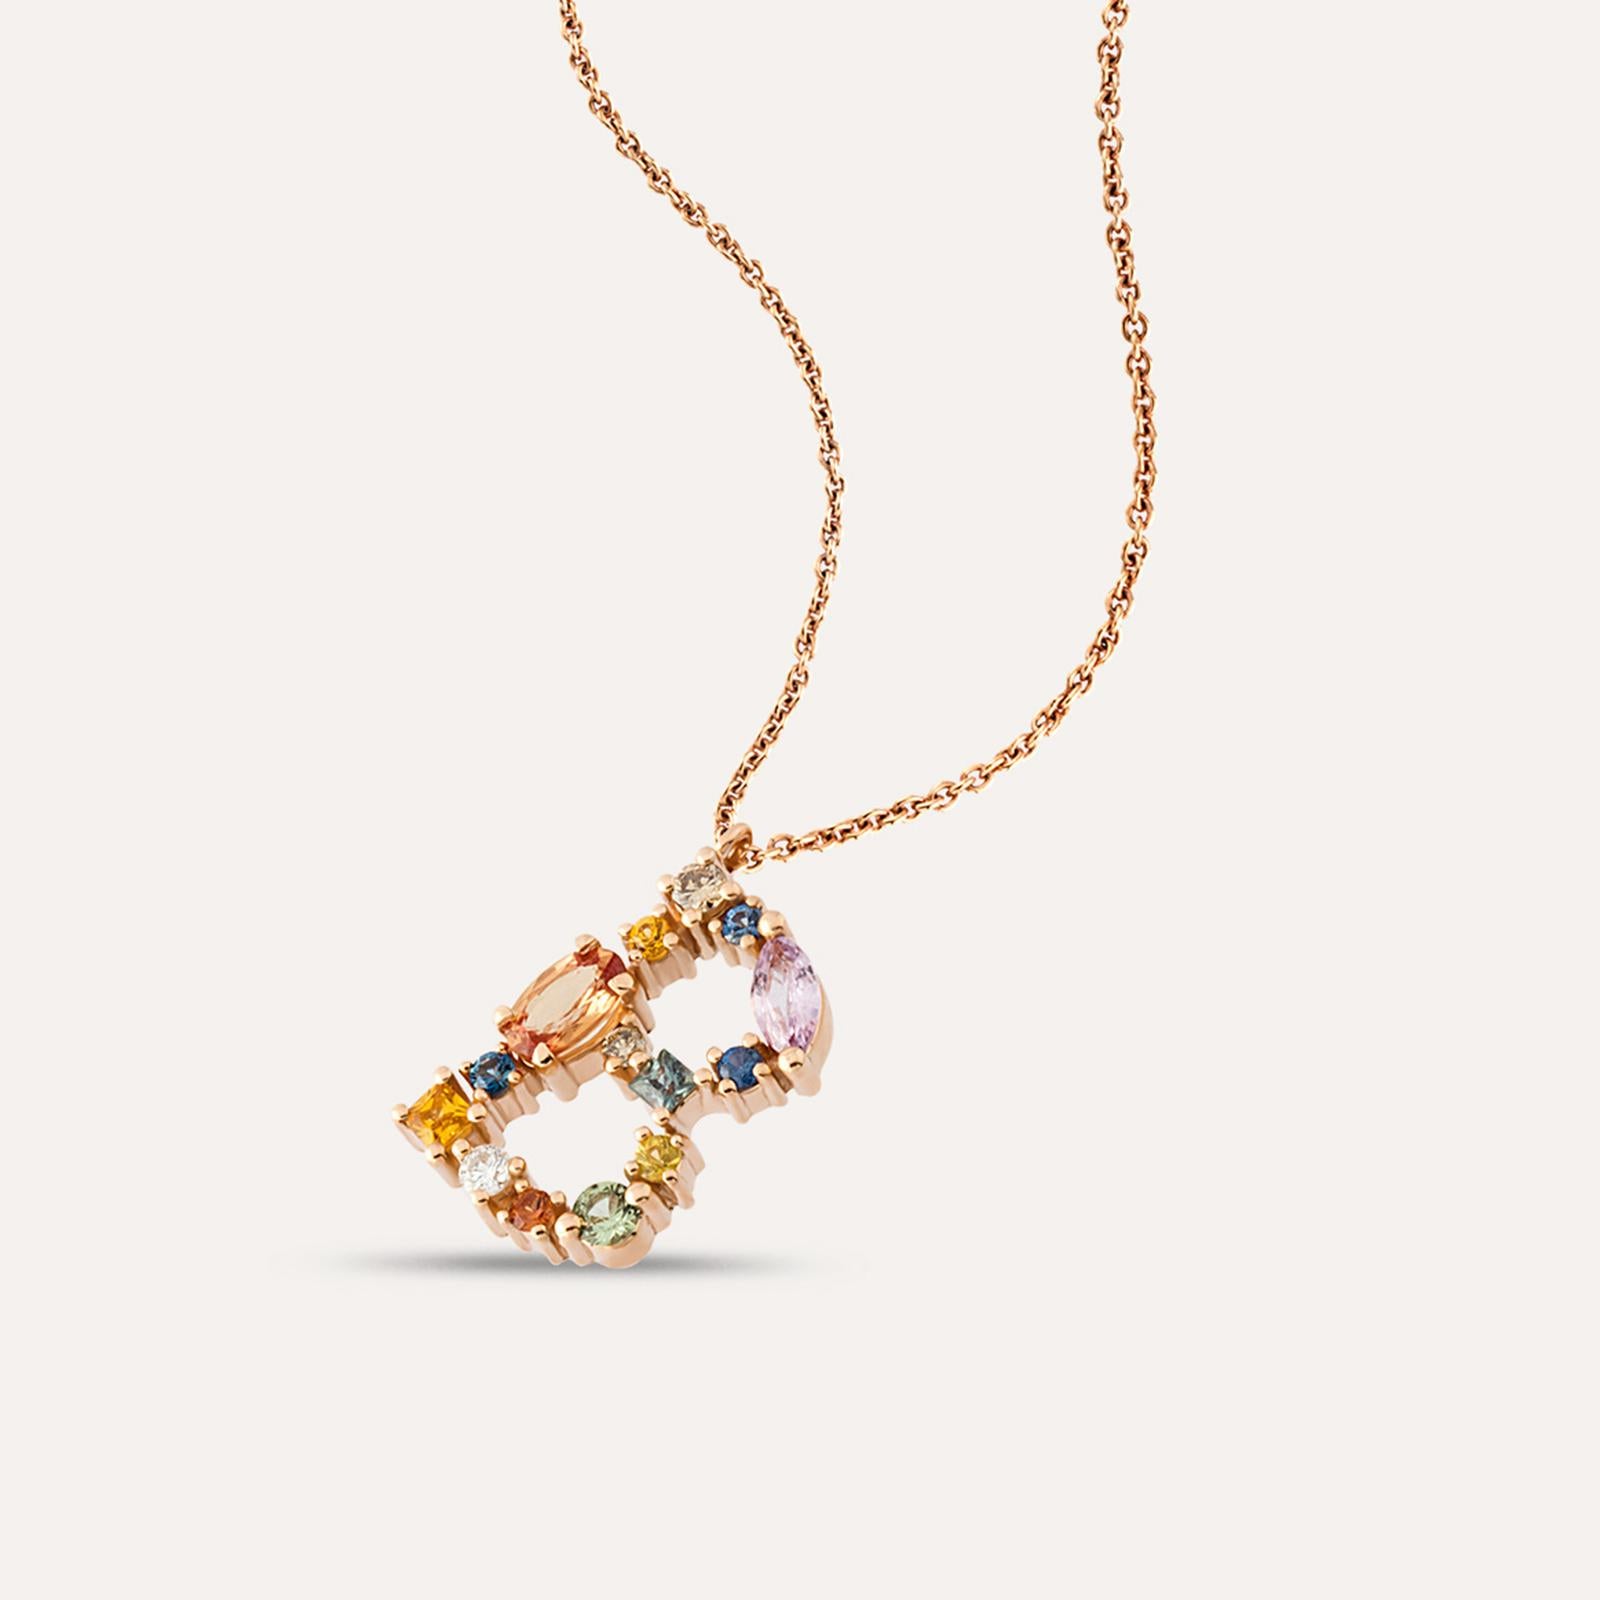 Stunning Initial B Letter Pendant Necklace with multi-colored 1.06ct. Diamonds
Best Christmas Gift of 2021

Brown Diamond: 0,03ct. 1 Piece SI Color Round Cut
White Diamond: 0.02ct. 1 Piece GH Color SI Round Cut
Multicolor Sapphire: 0,38ct.	1 Piece